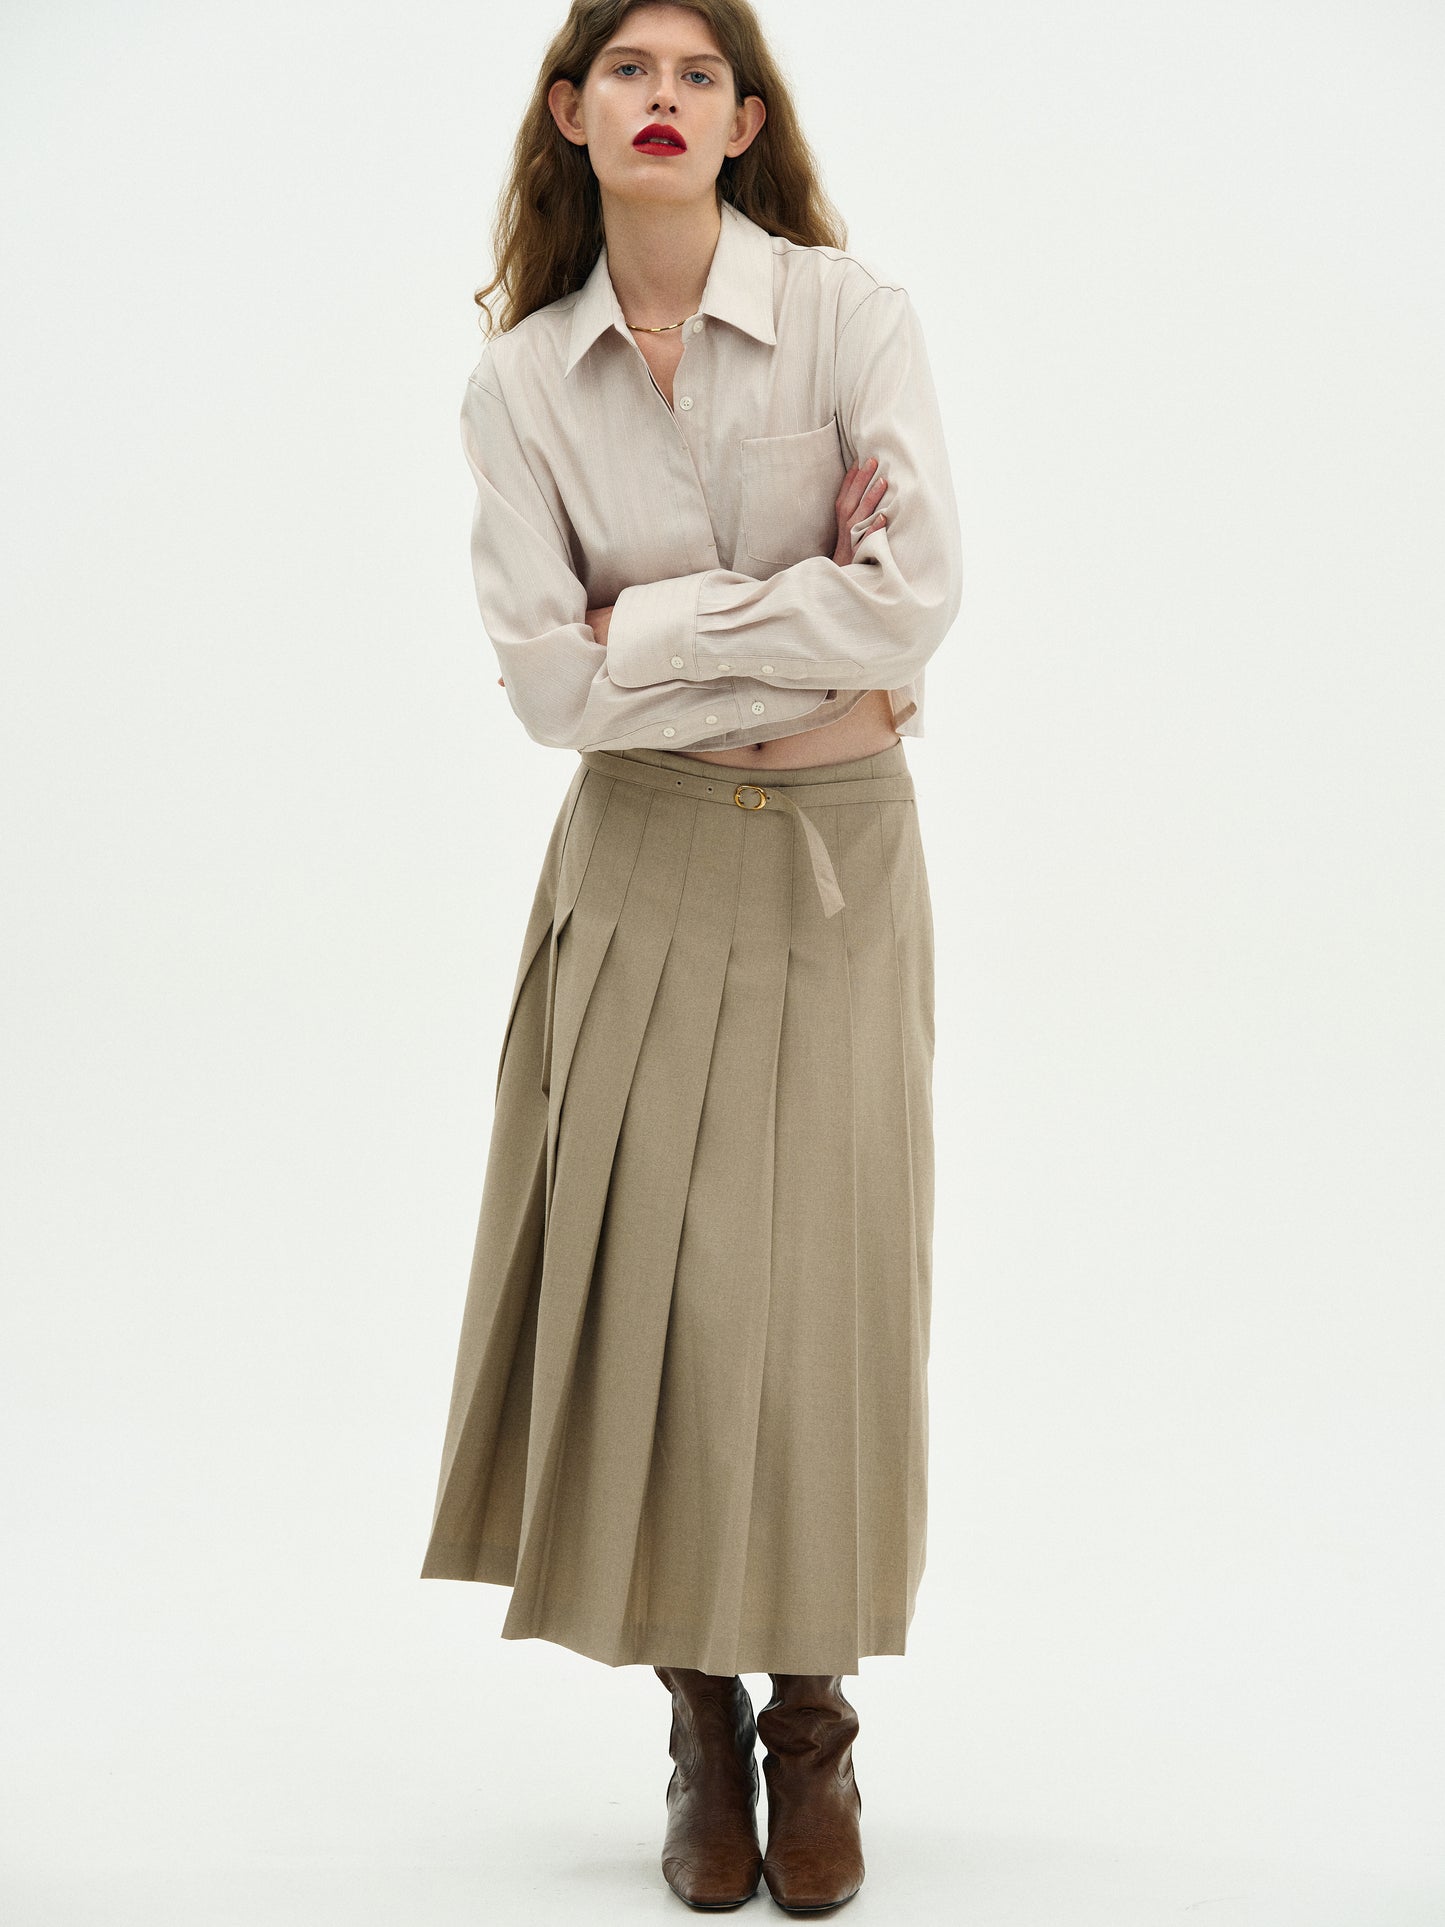 Buckle Pleated Skirt, Sandstone – SourceUnknown